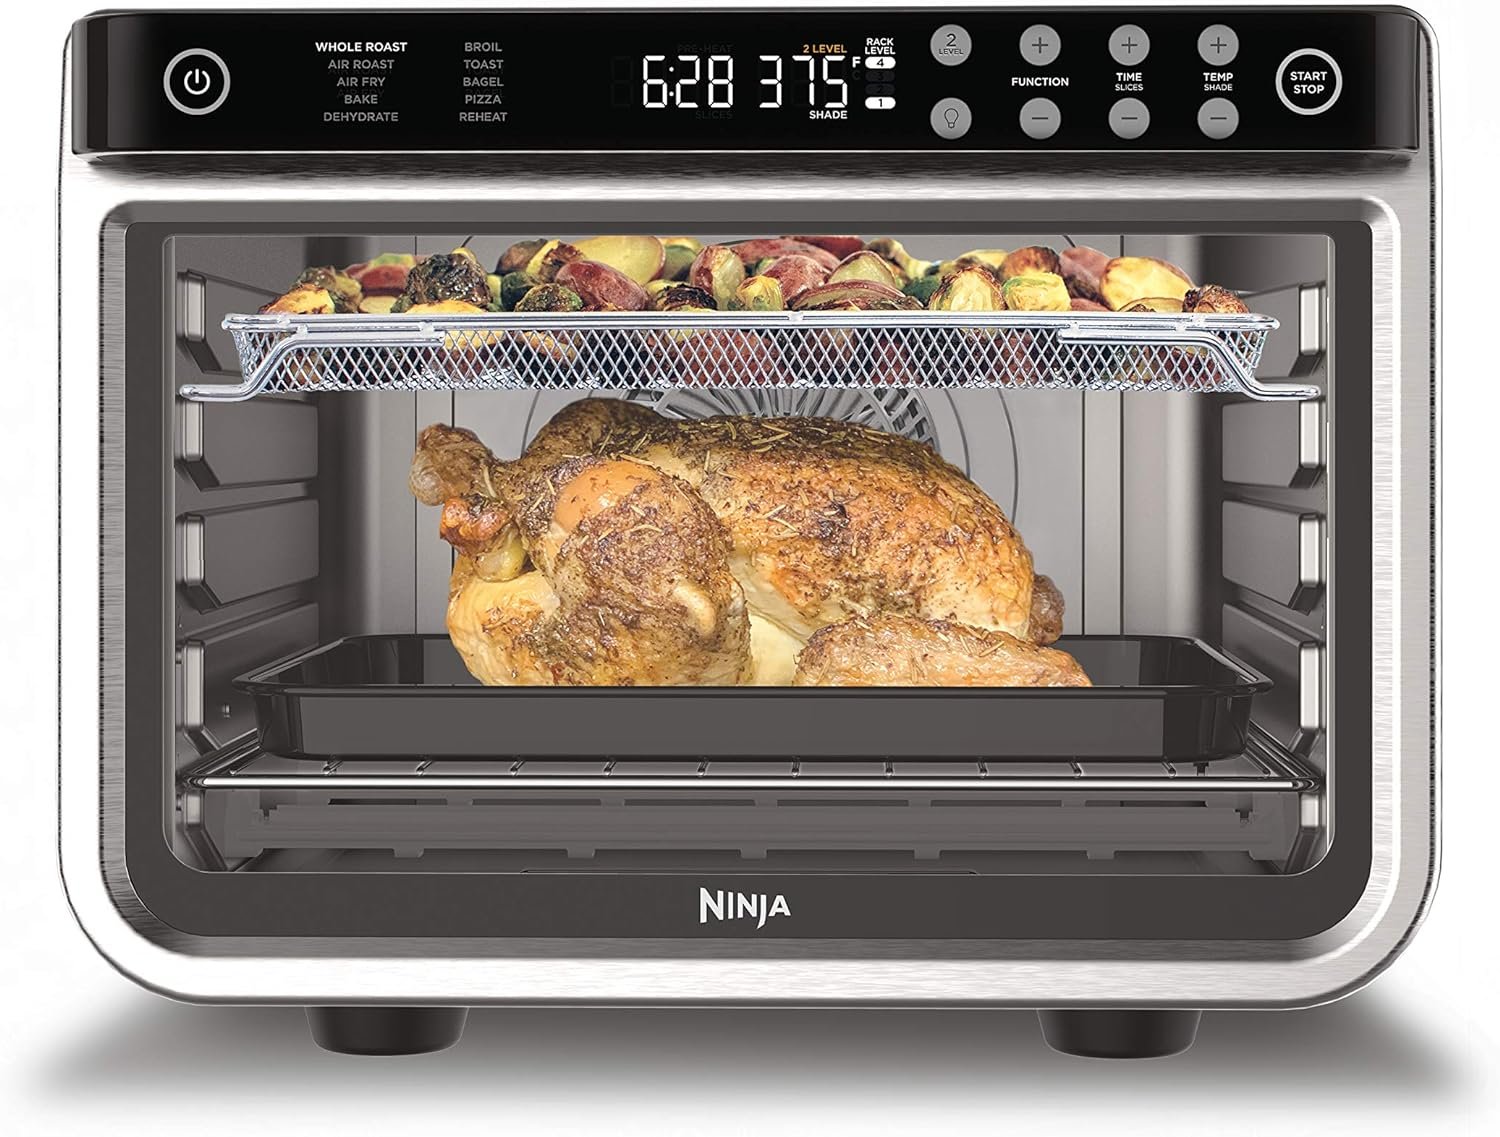 Ninja DT201 Foodi 10-in-1 XL Pro Air Fry Digital Countertop Convection Toaster Oven with Dehydrate and Reheat, 1800 Watts, Stainless Steel Finish